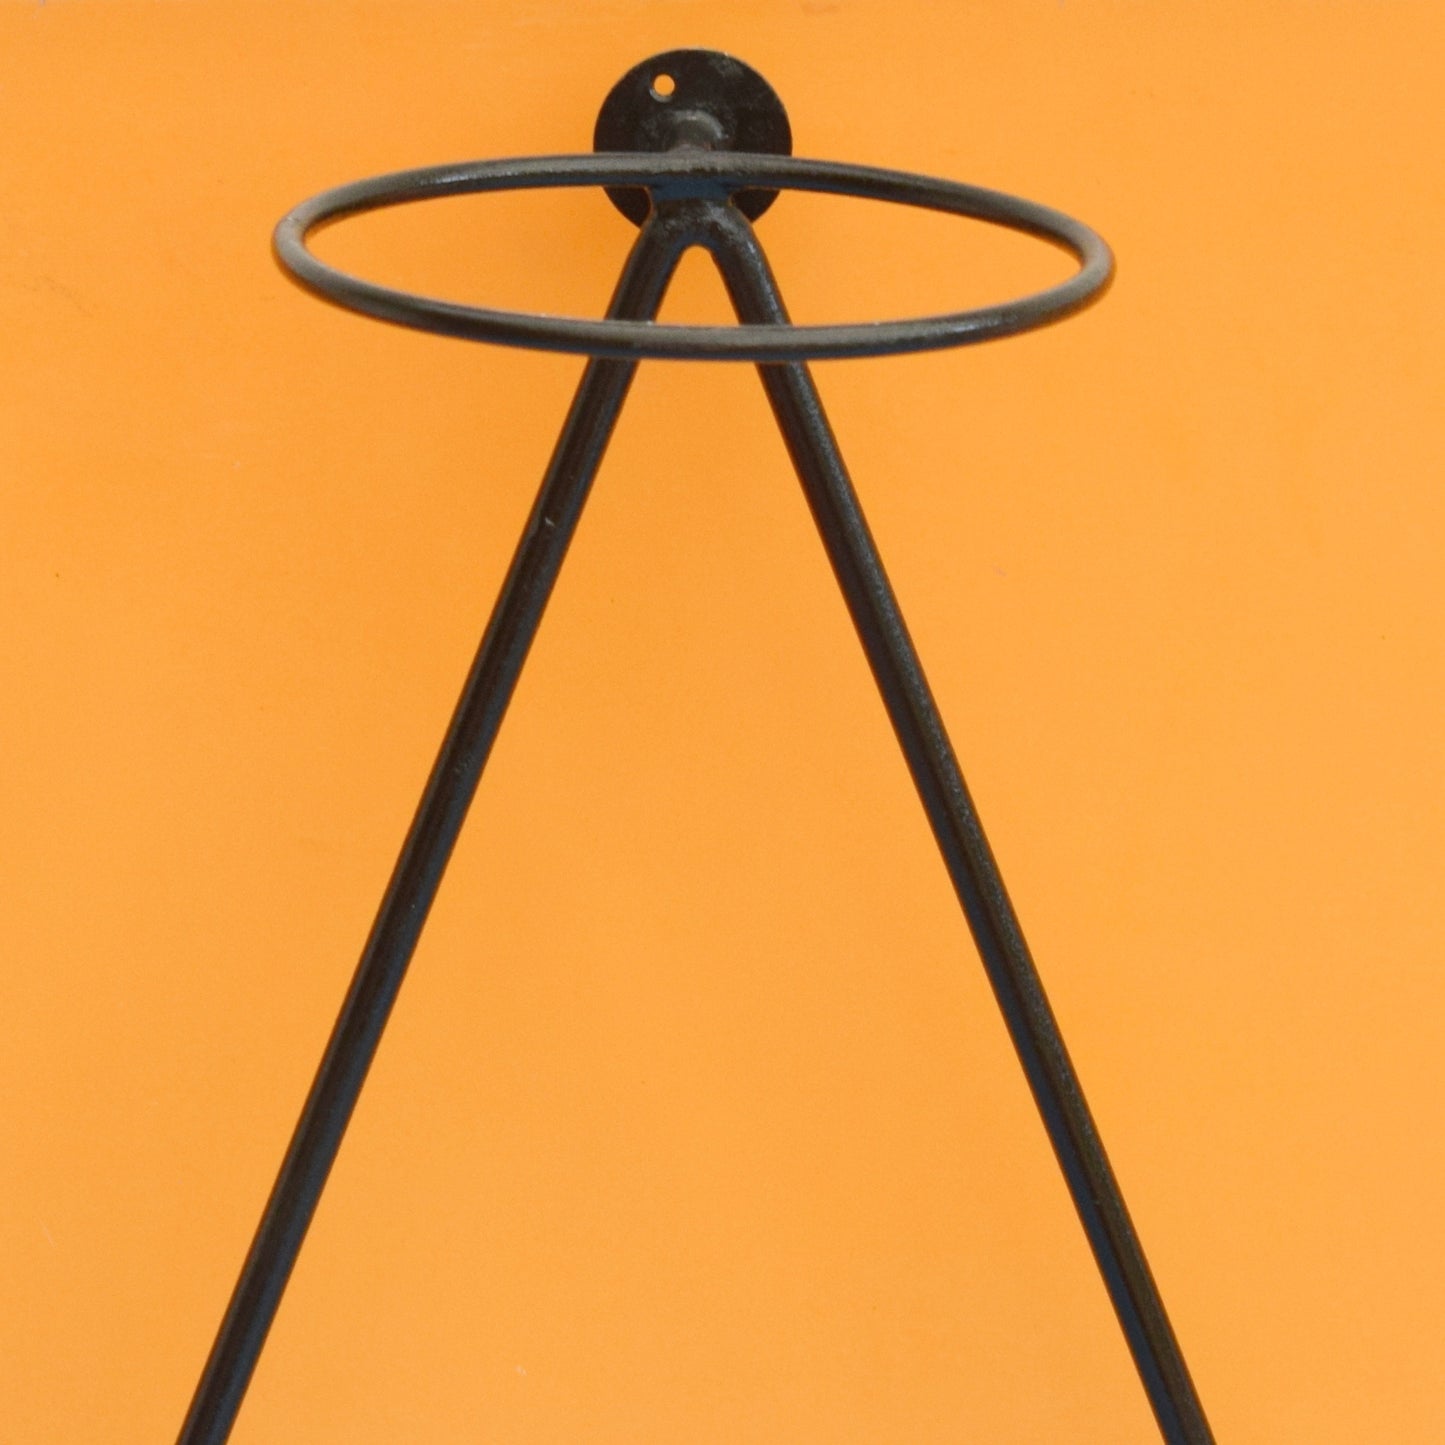 Vintage 1950s Atomic Wall Mounted Hall Stand - Yellow & Black